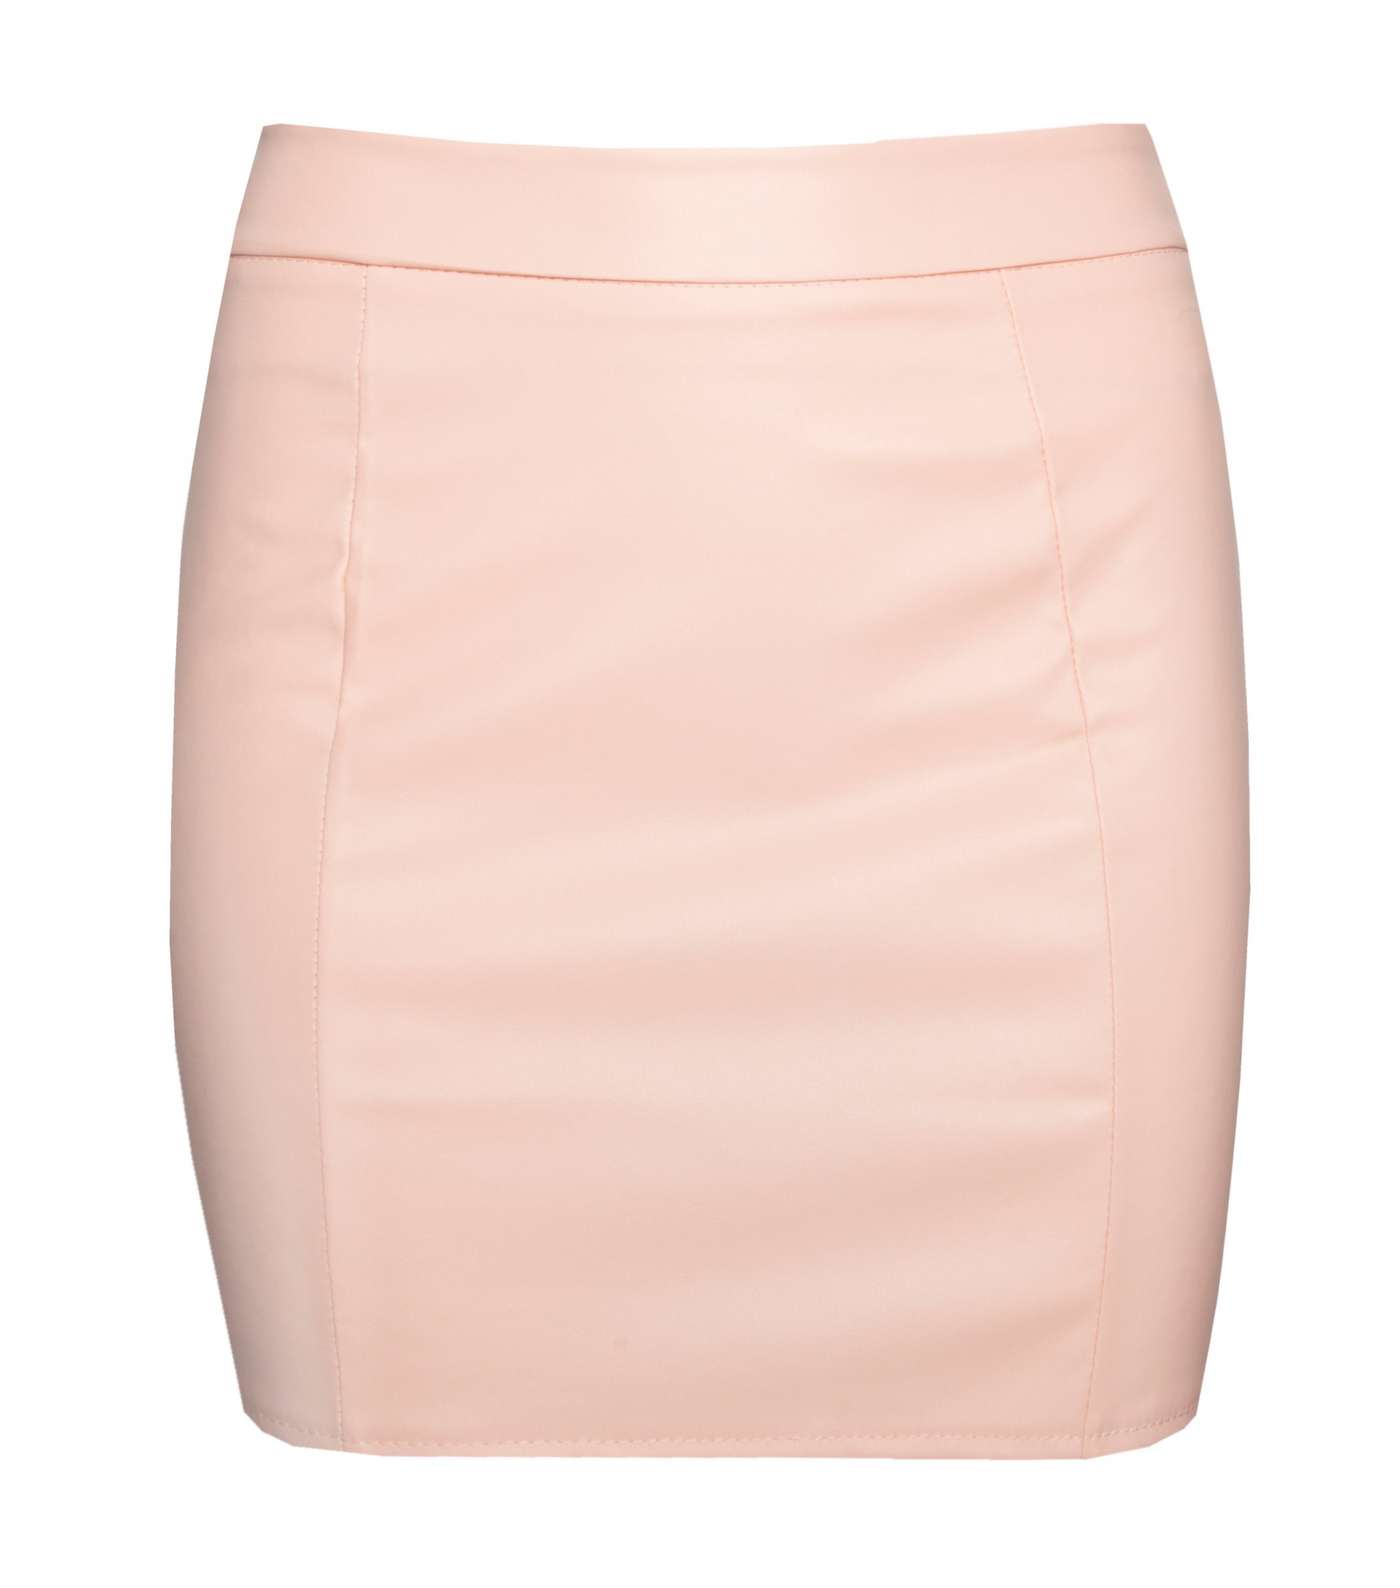 21st Mill Pink Leather-Look Mini Skirt Image 4